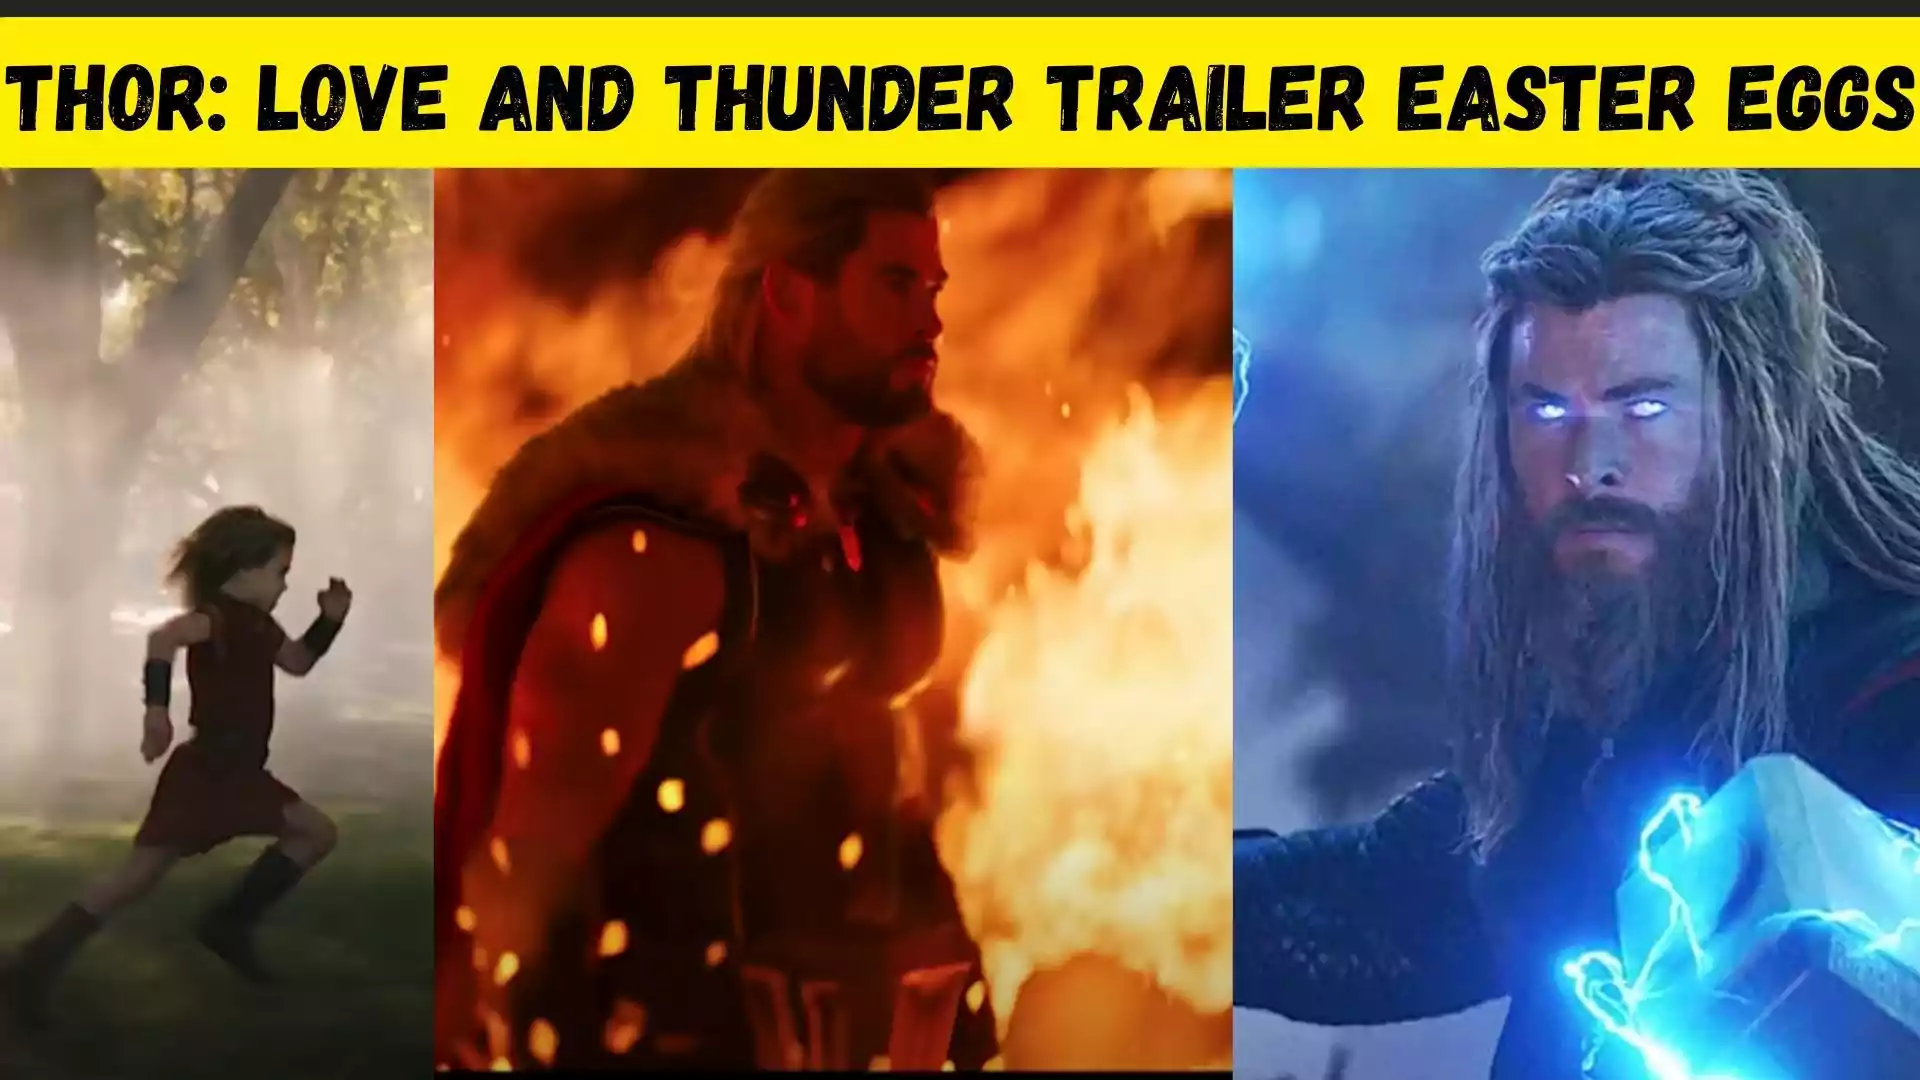 Thor: Love and Thunder Trailer Easter Eggs wallpaper and images